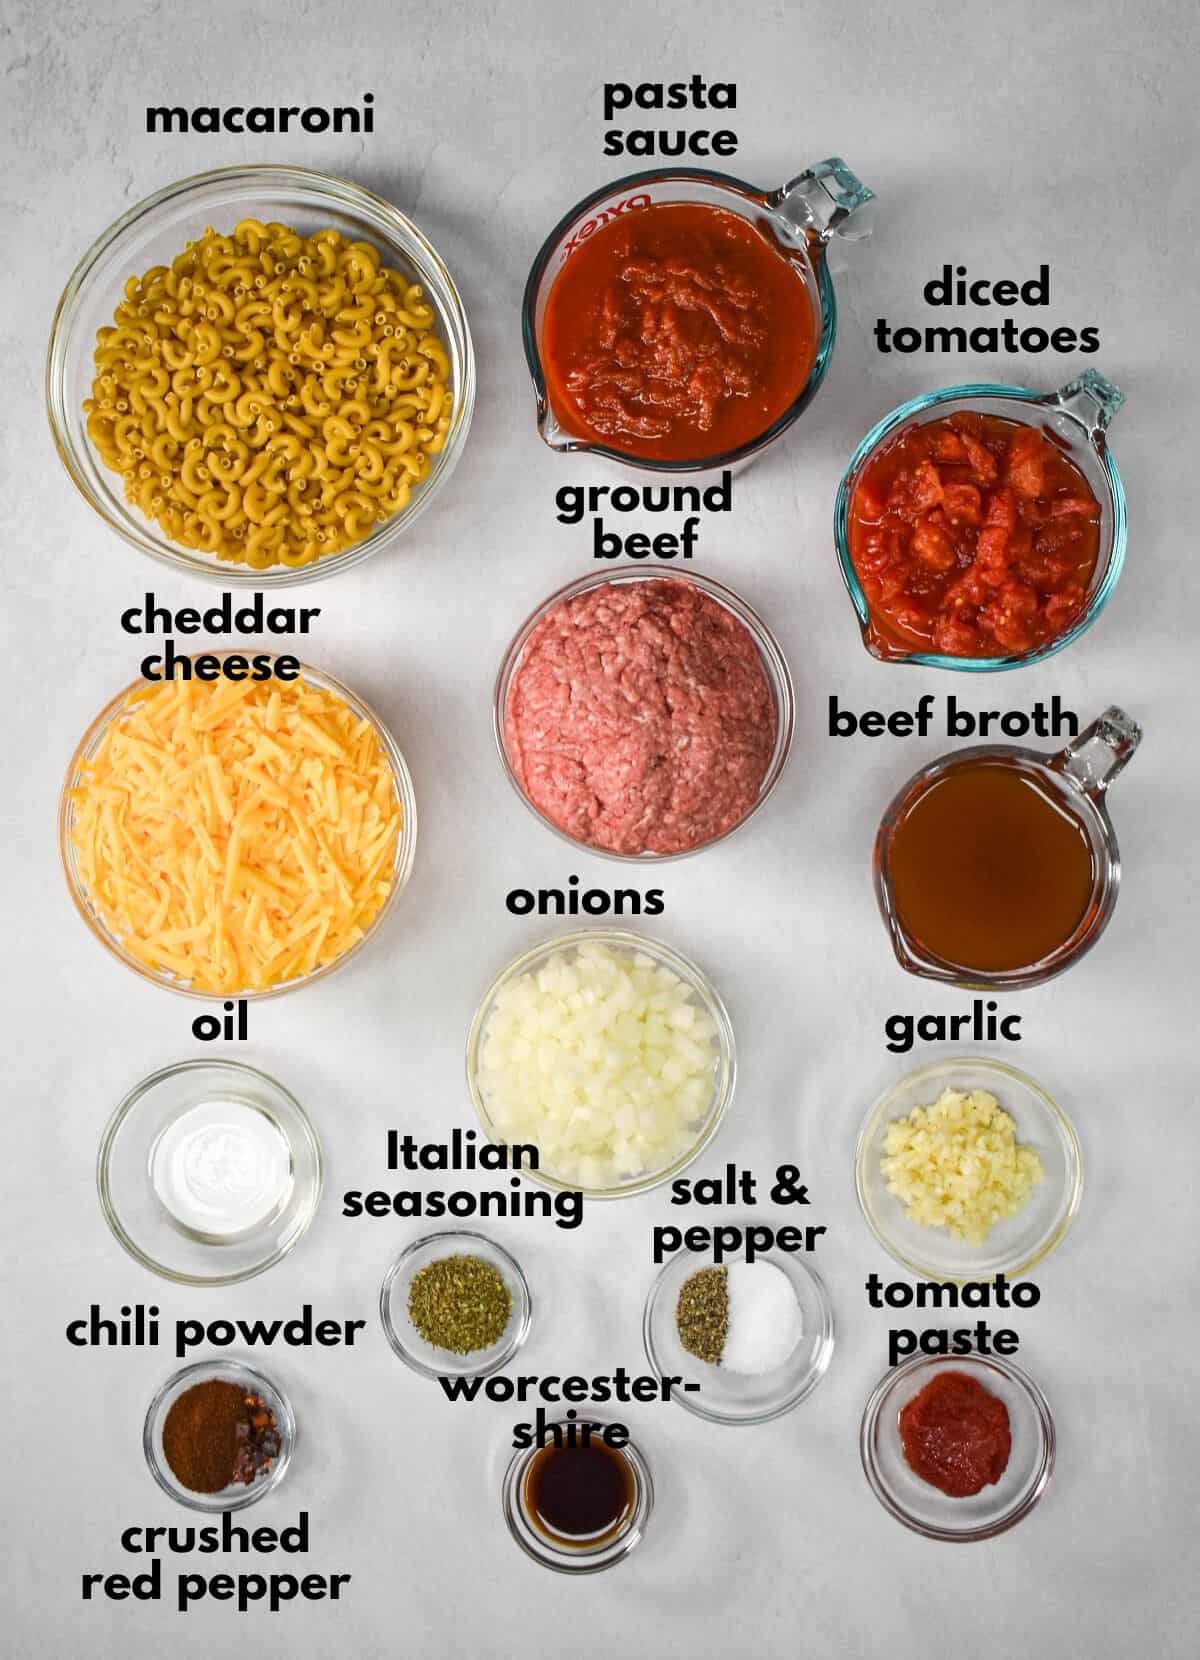 The ingredients for the pasta casserole prepped and arranged in glass bowls on a table with each labeled with small, black letters.